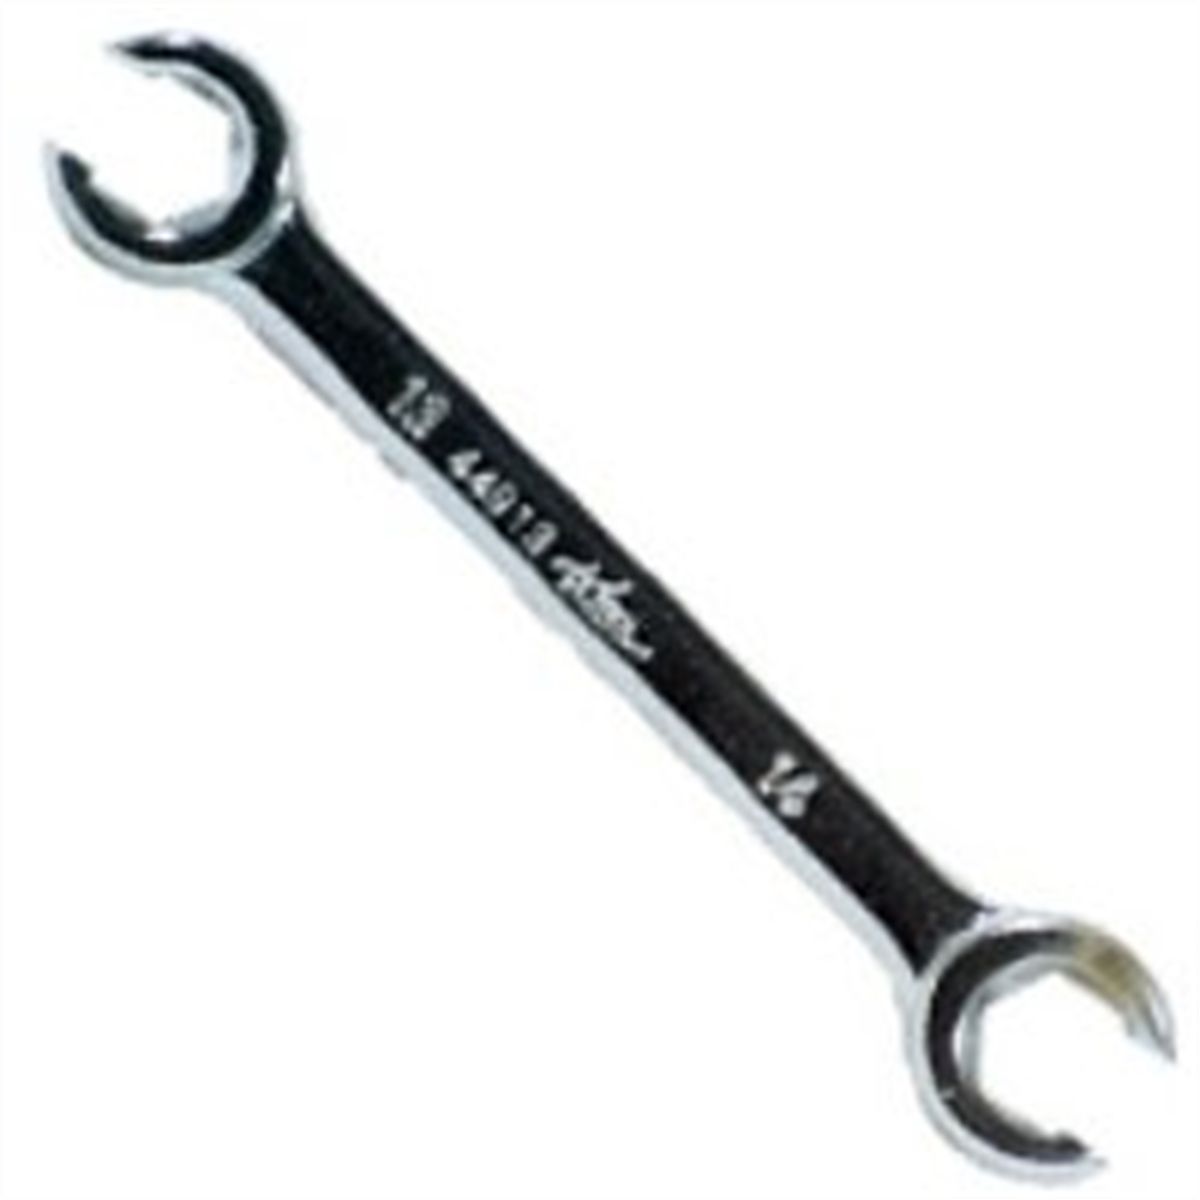 Flare Nut Wrench - 5/8 In x 11/16 In